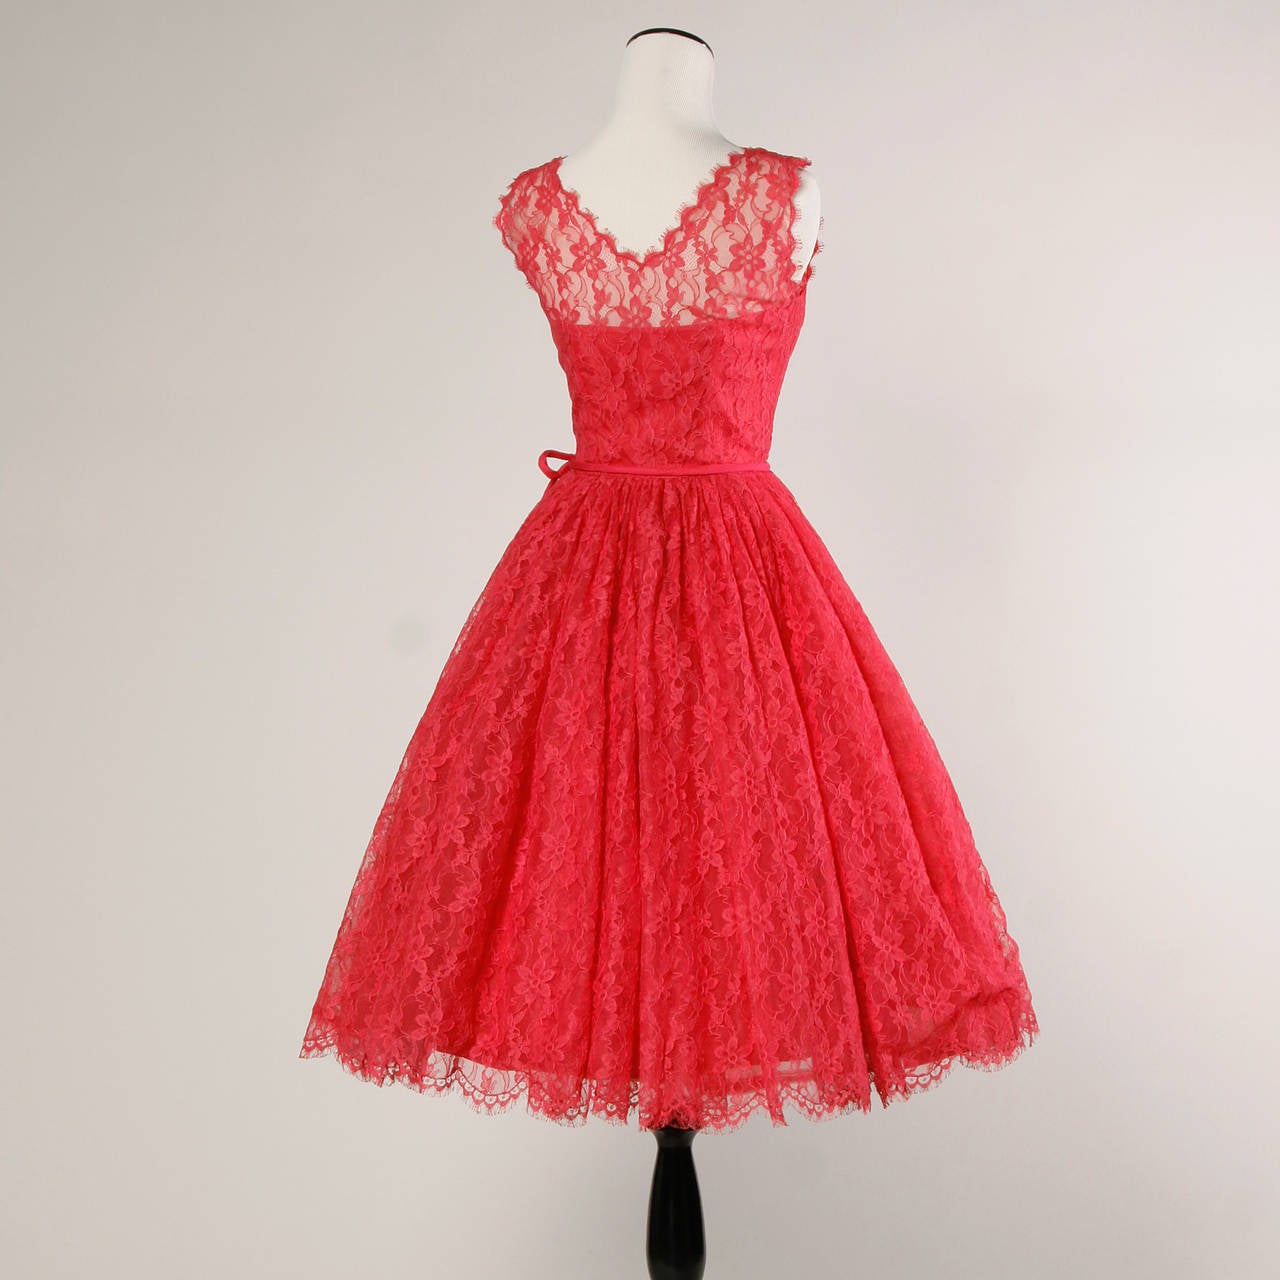 Vibrant fuchsia pink cocktail dress from the 1950s. Full sweep and scalloped edges.

Details:

Partially Lined
Side Metal Zip and Hook Closure
Marked Size: Not Marked
Estimated Size: XXS
Color: Bright Fuchsia Pink
Fabric: Lace/ Tulle/ Nylon
Label: